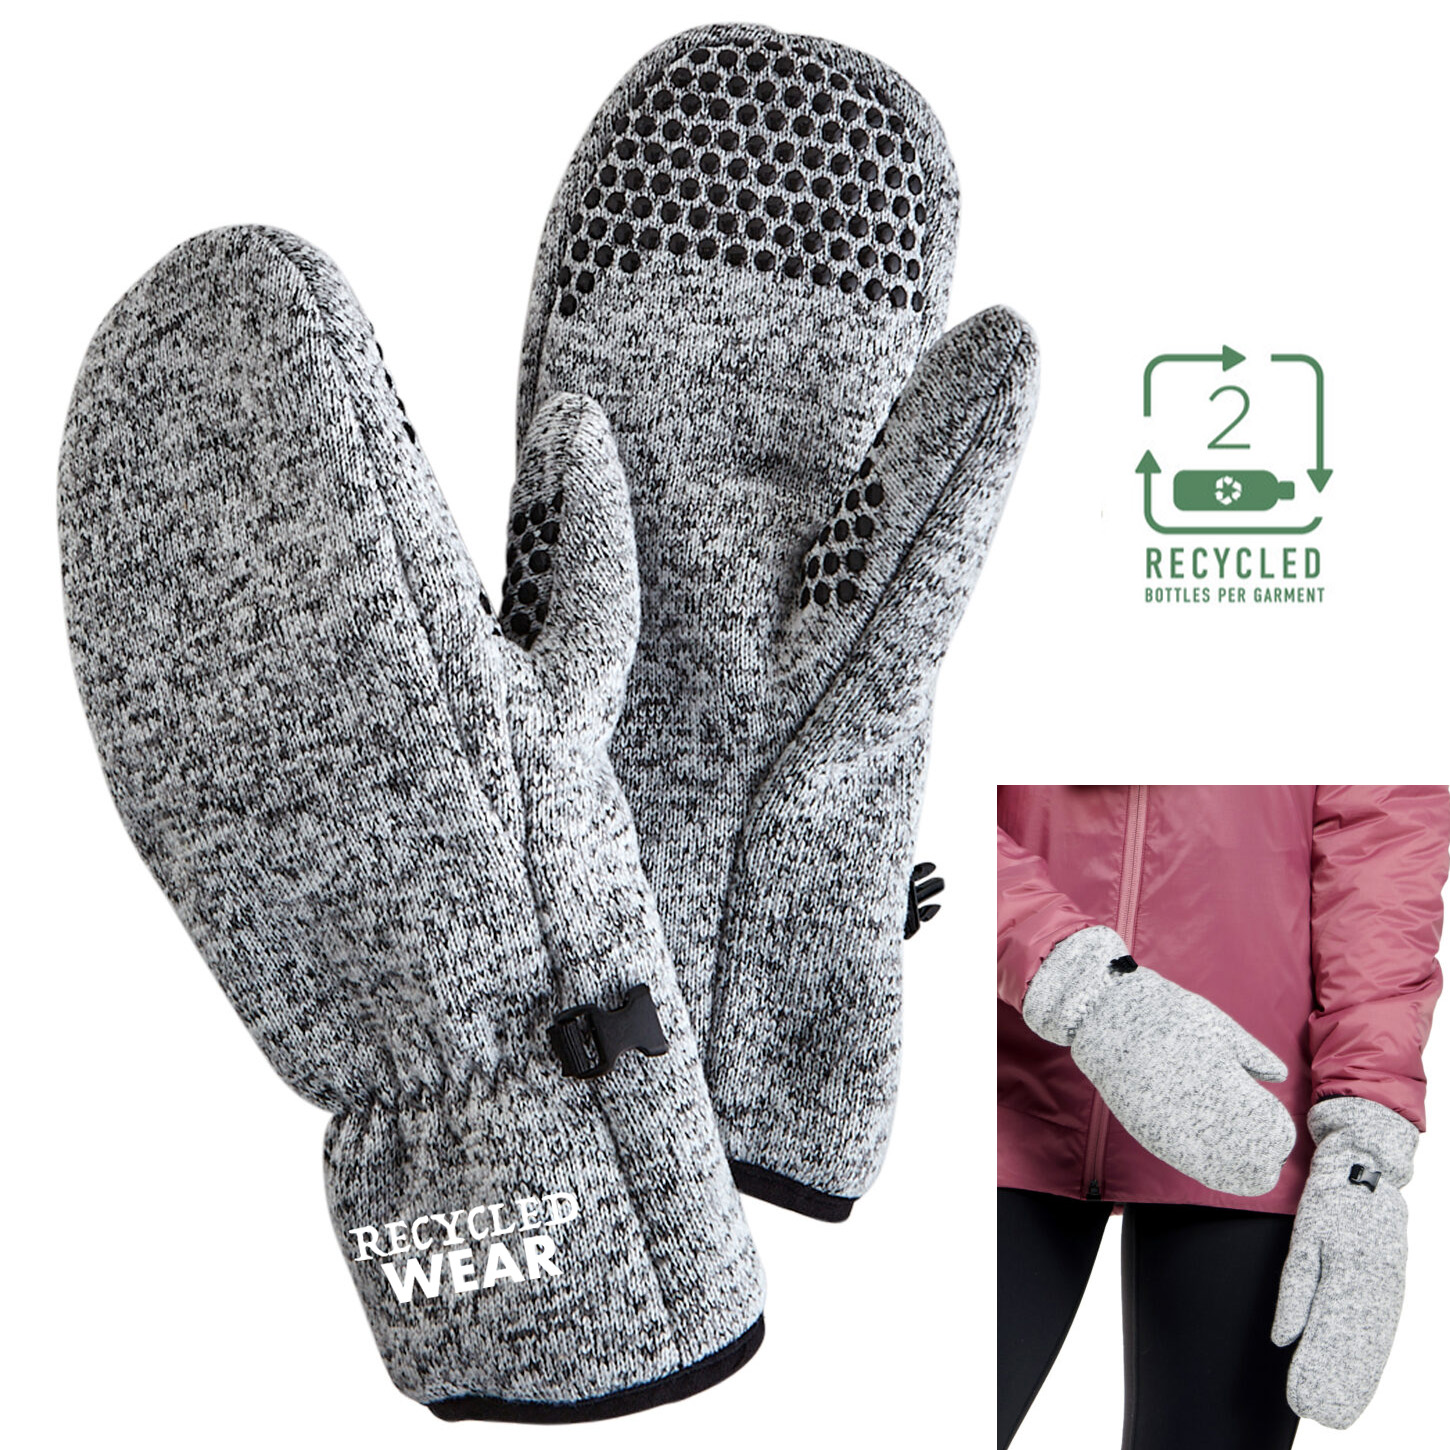 gray custom embroidered mittens worn by a person, showcasing the design and fit